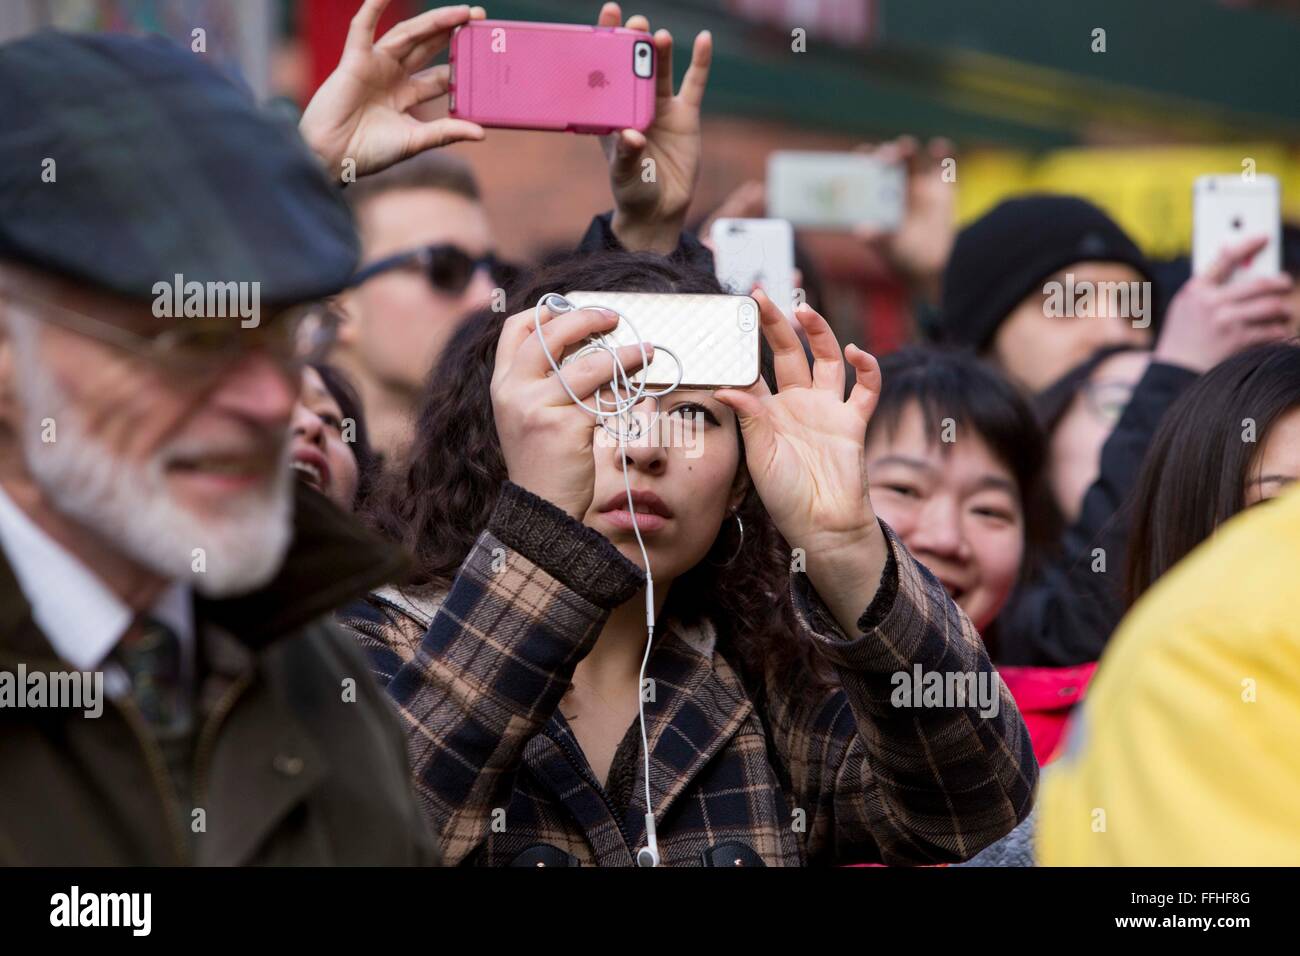 Manchester celebrates Chinese New Year today. Crowds take photos on their phones Stock Photo